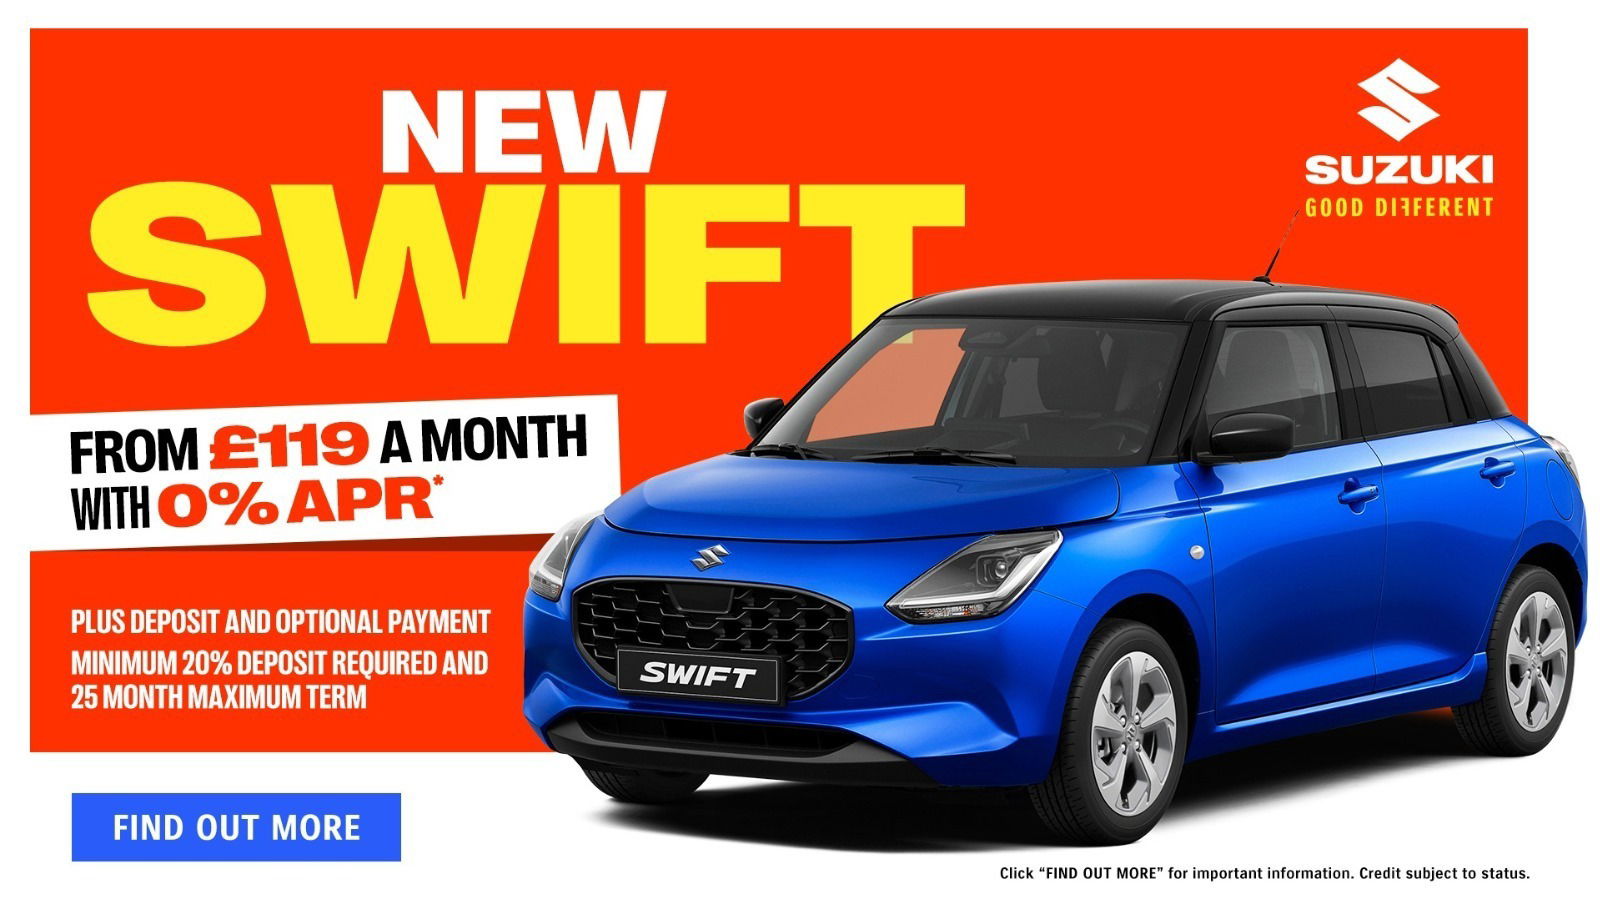 Suzuki Swift latest dealership new car offers near me in the north west